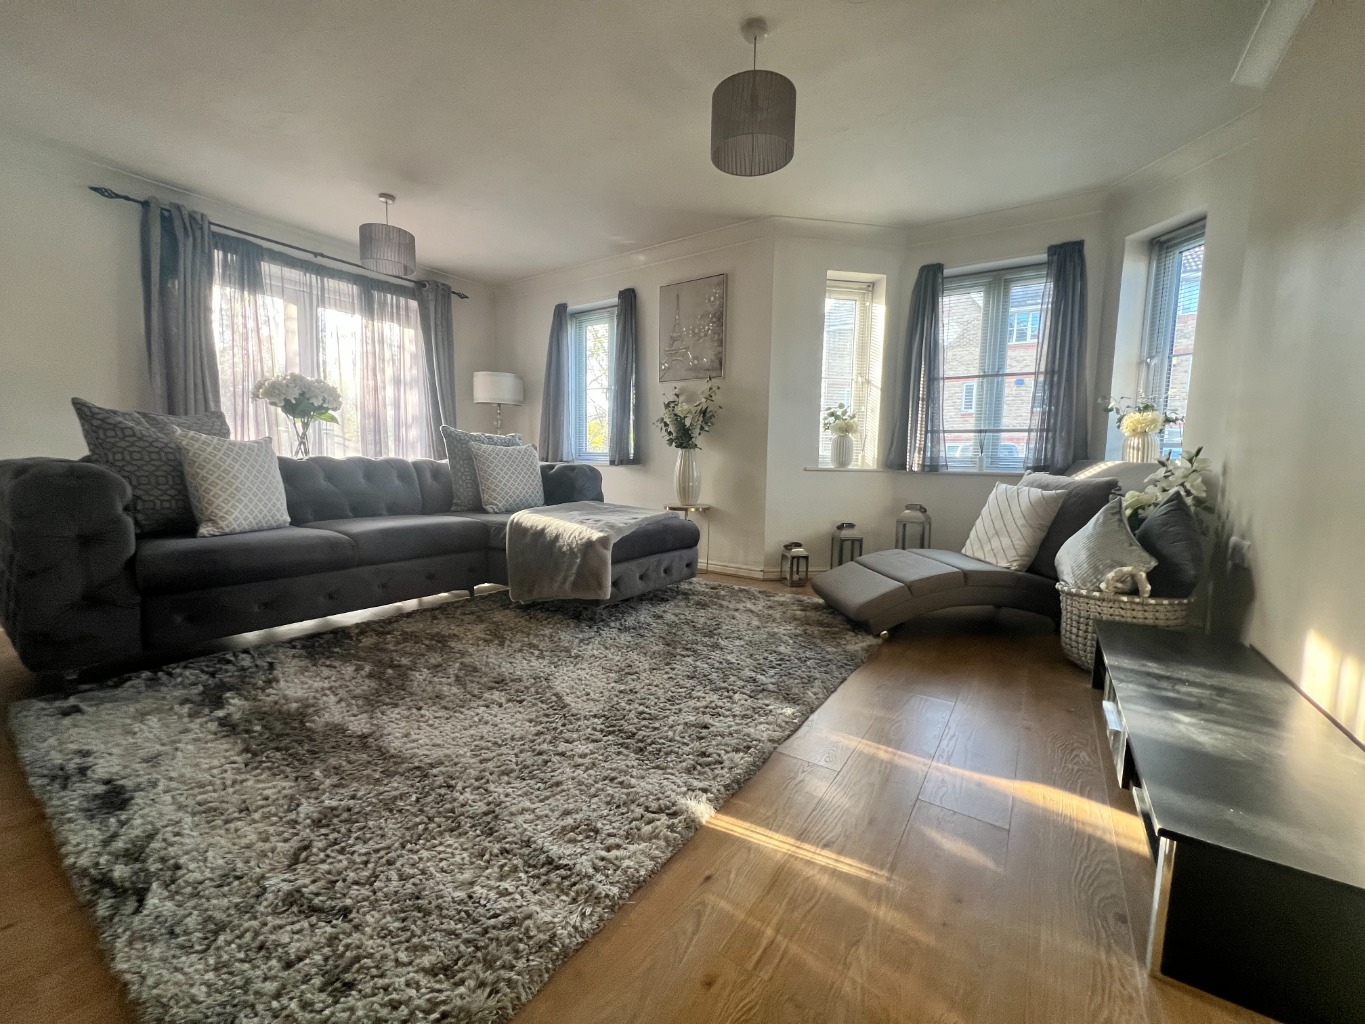 2 bed flat for sale in Thamesmead - Property Image 1